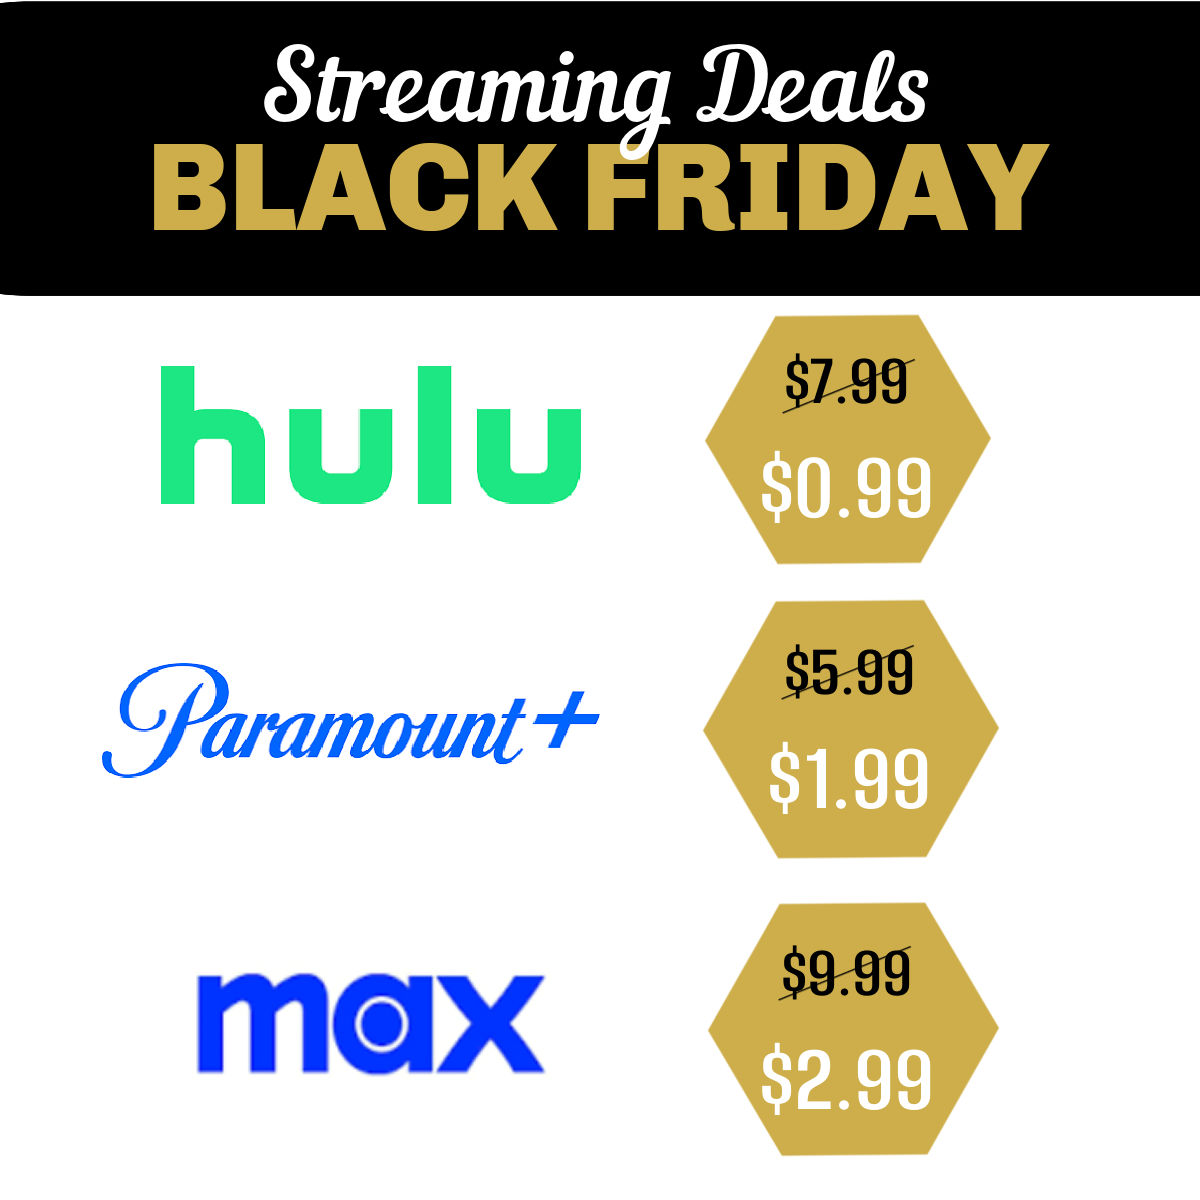 Black Friday Streaming Deal: Max for $2.99 a Month